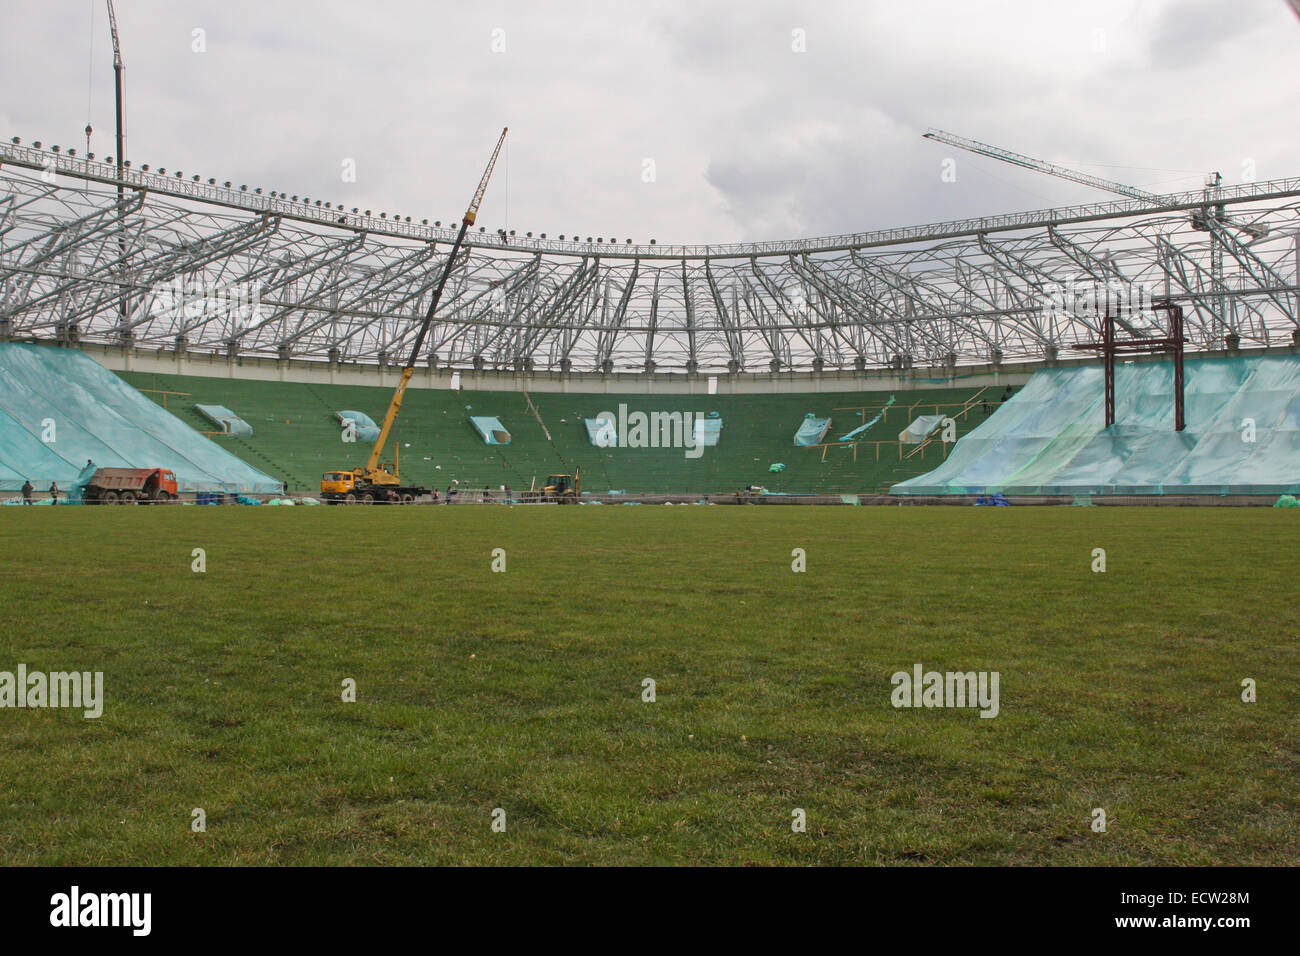 'Akhmat Arena' sports stadium under construction in the Chechen capital Grozny, Russia. The building was first used in May 2011. Stock Photo